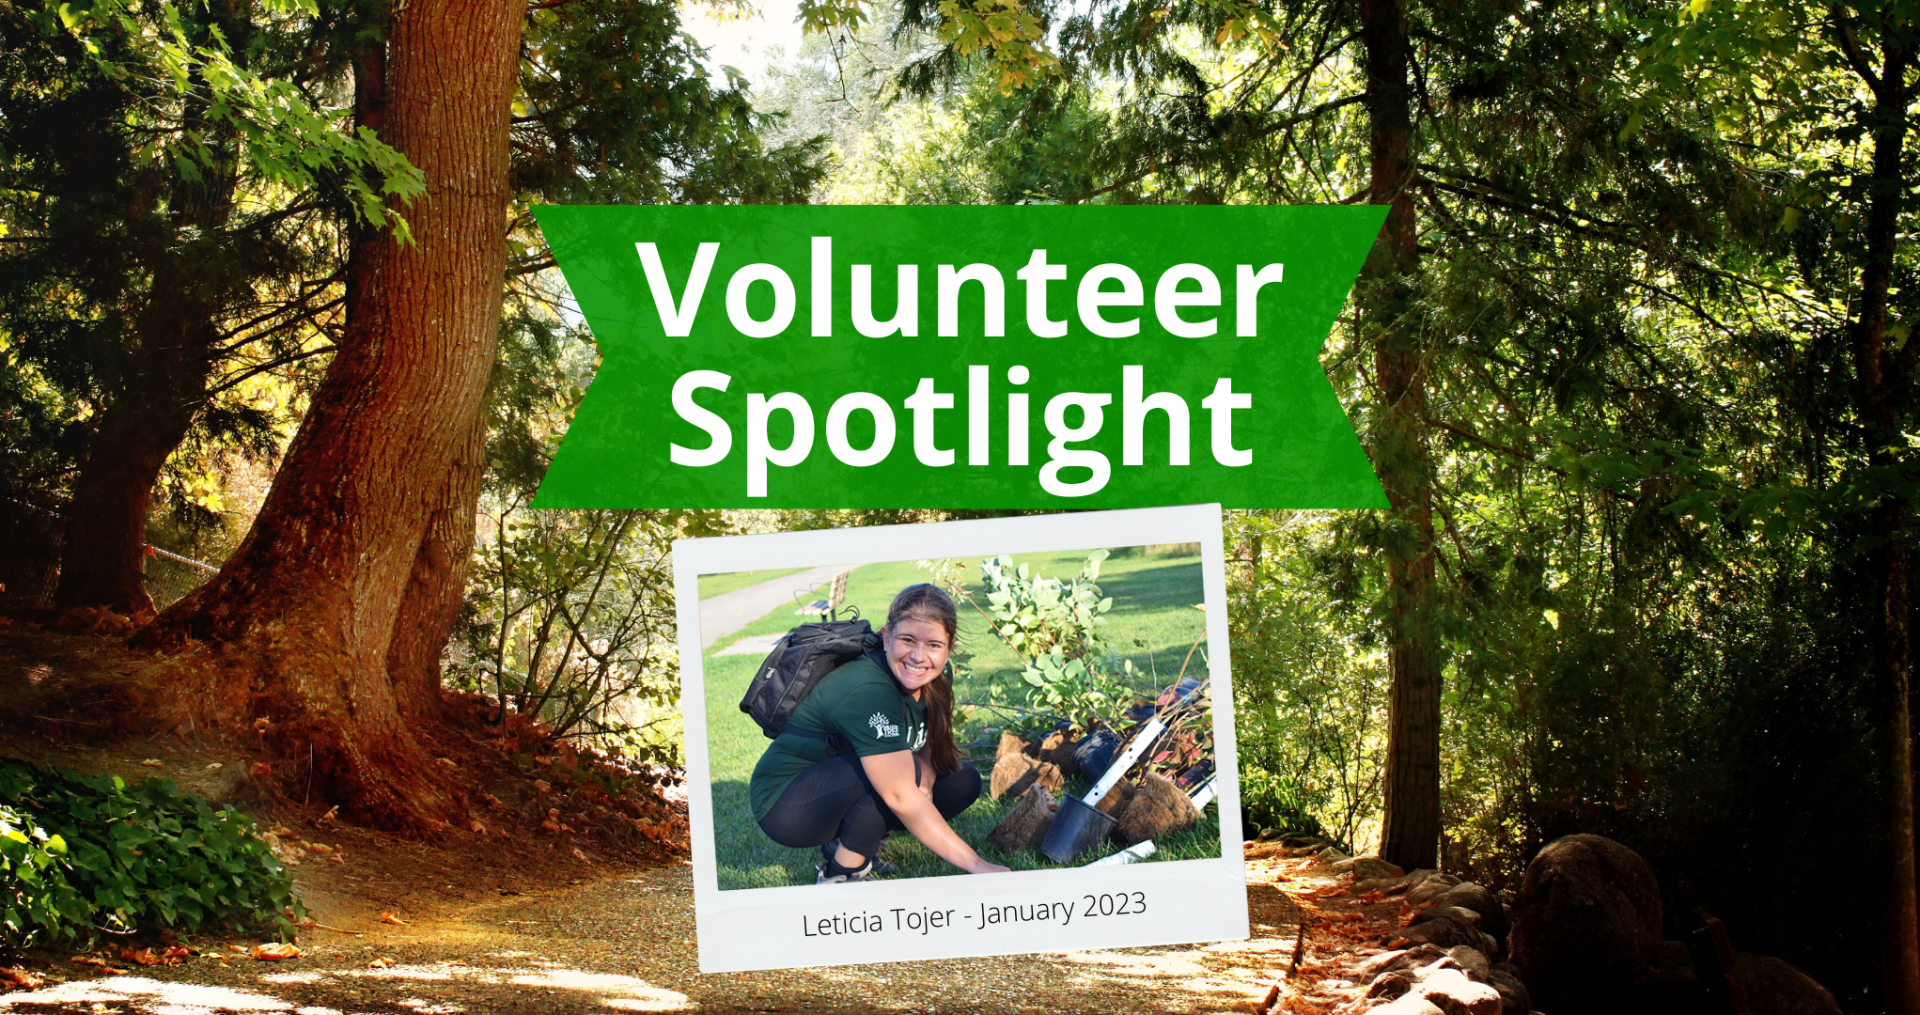 Volunteer Spotlight graphic with a photo of Leticia